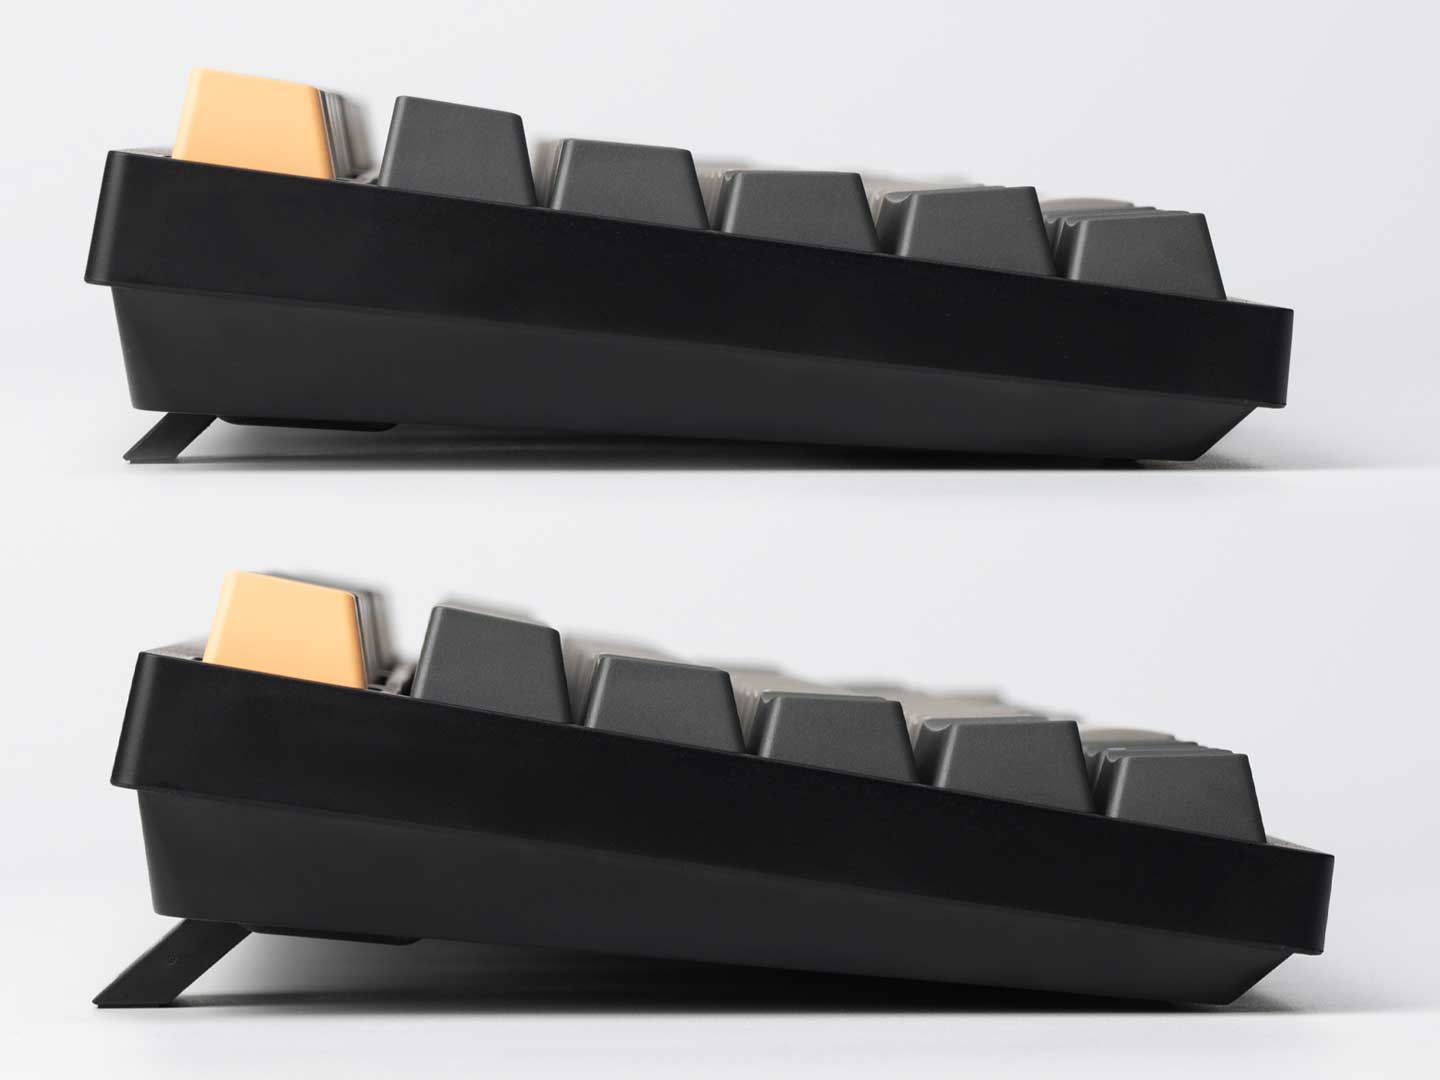 Ergonomic feature of the Keychron C1 Pro QMK/VIA Wired Mechanical Keyboard